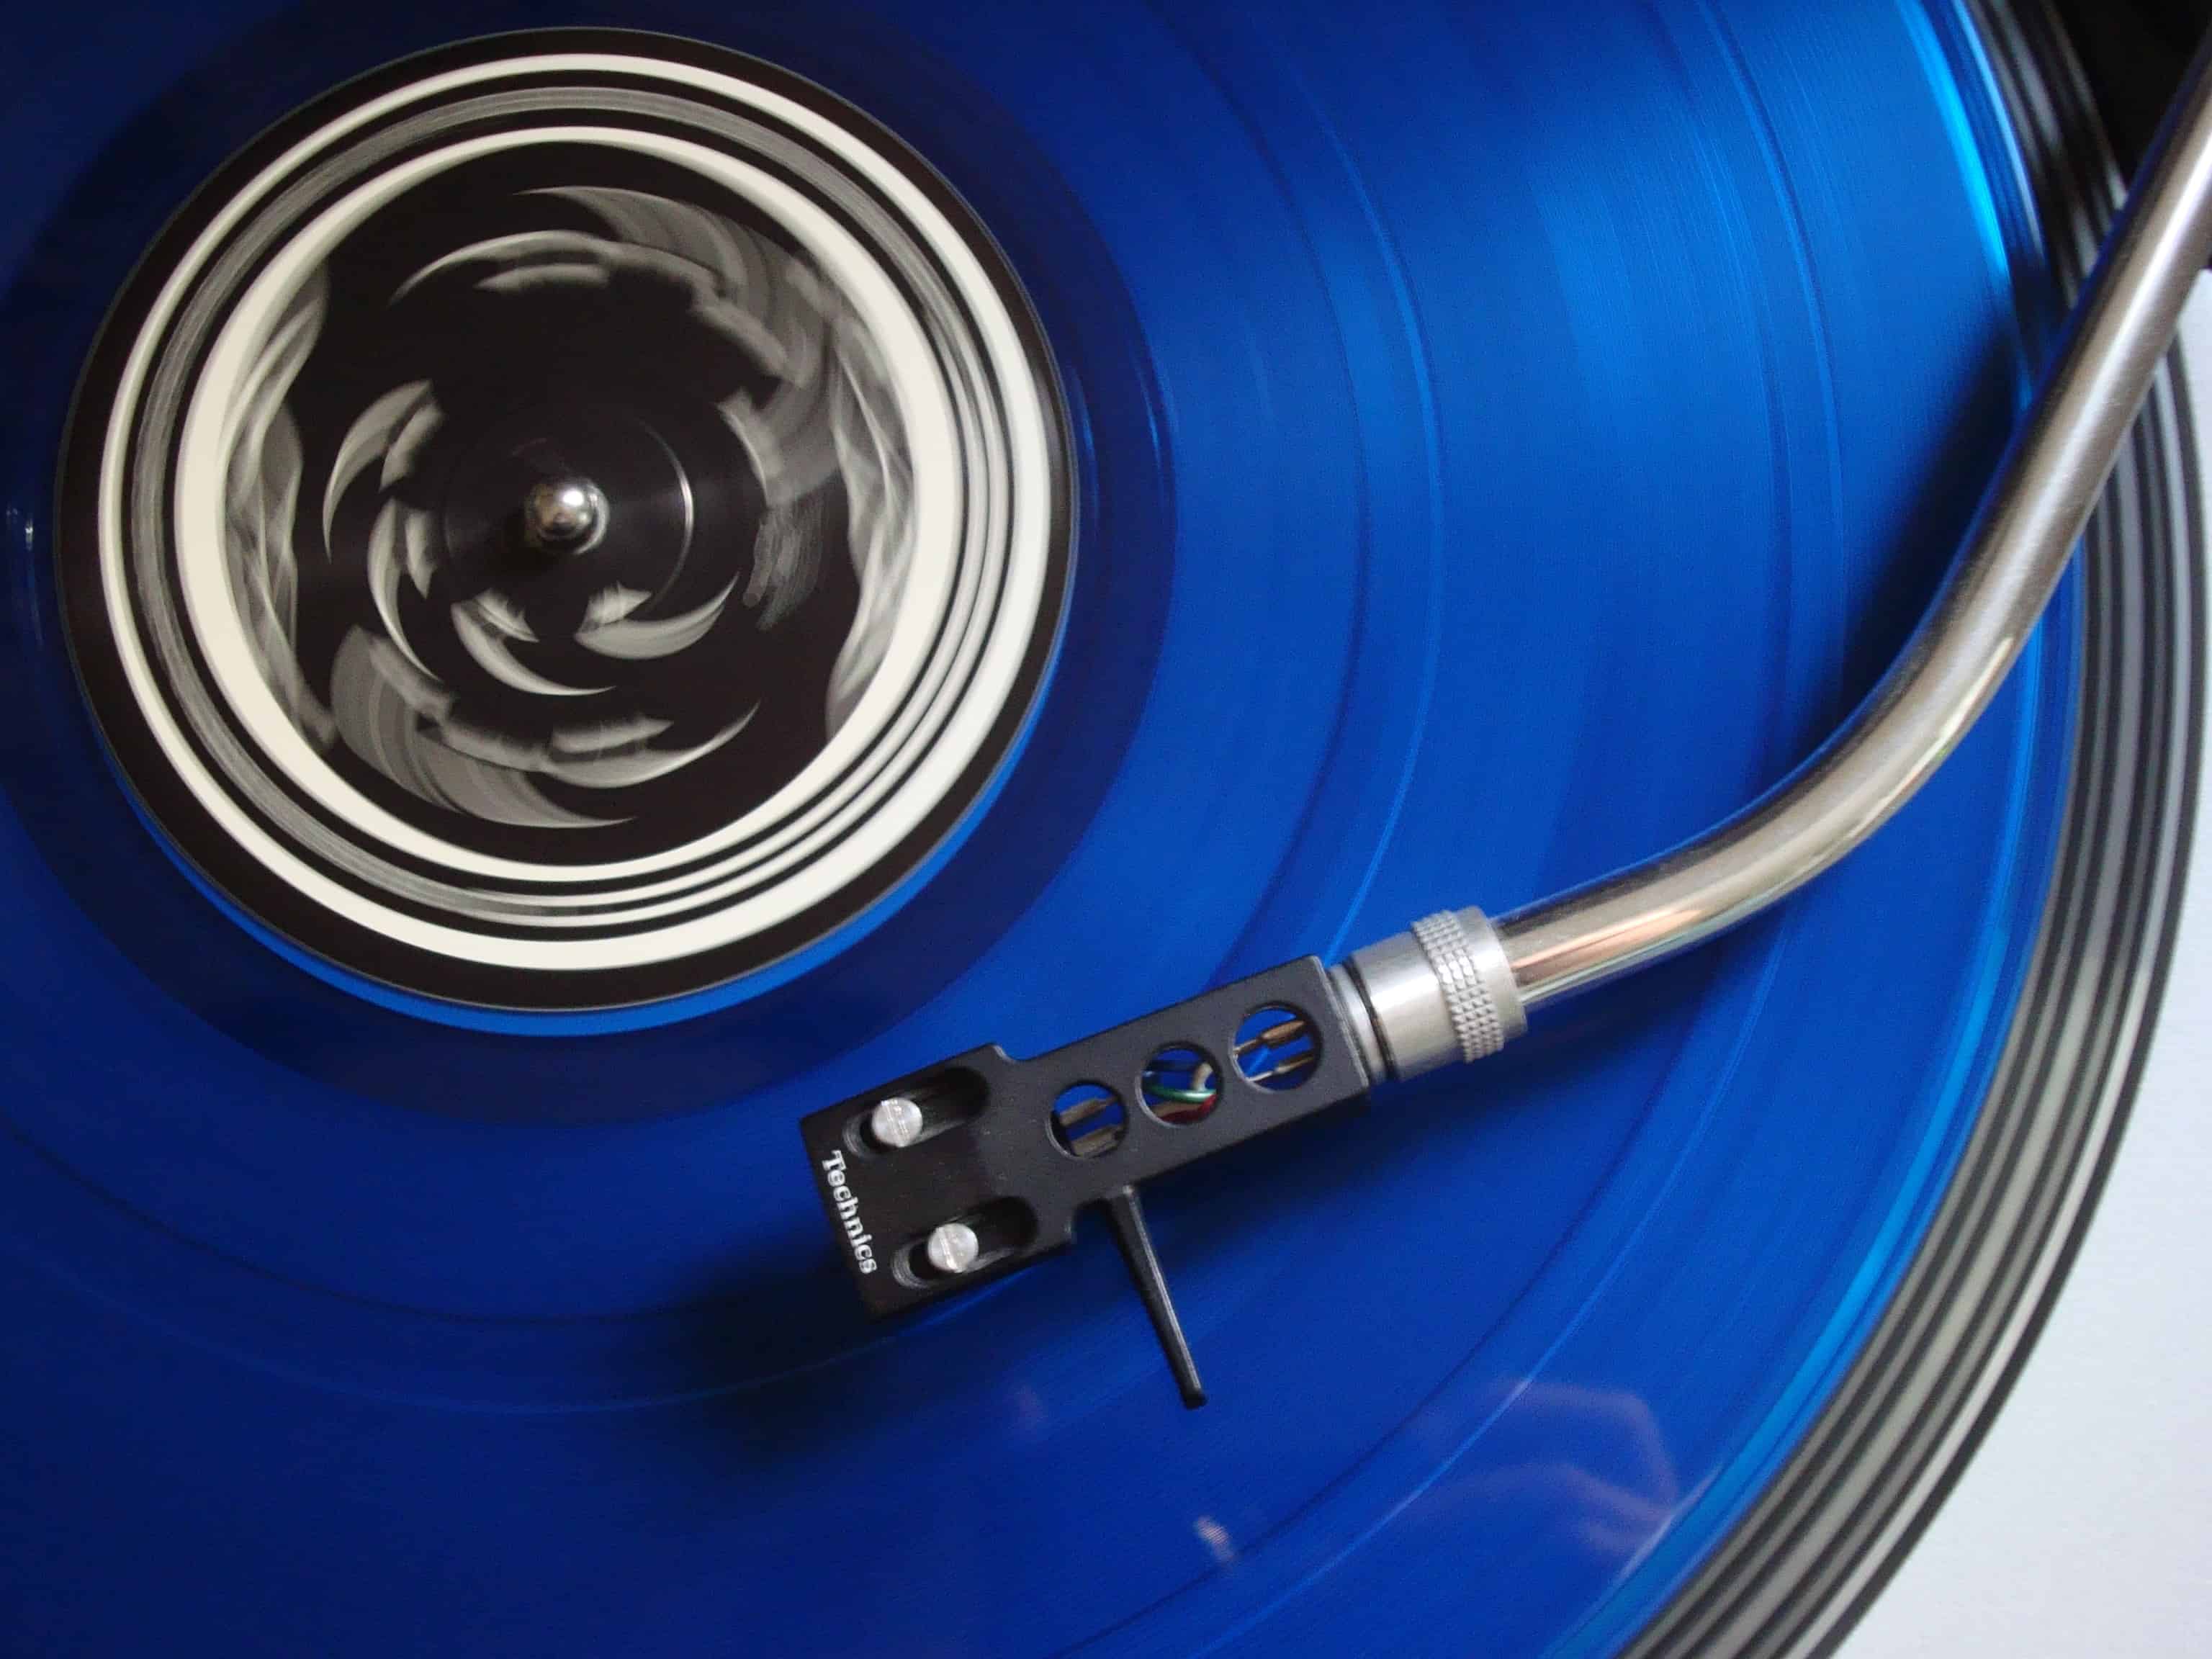 black and blue turntable